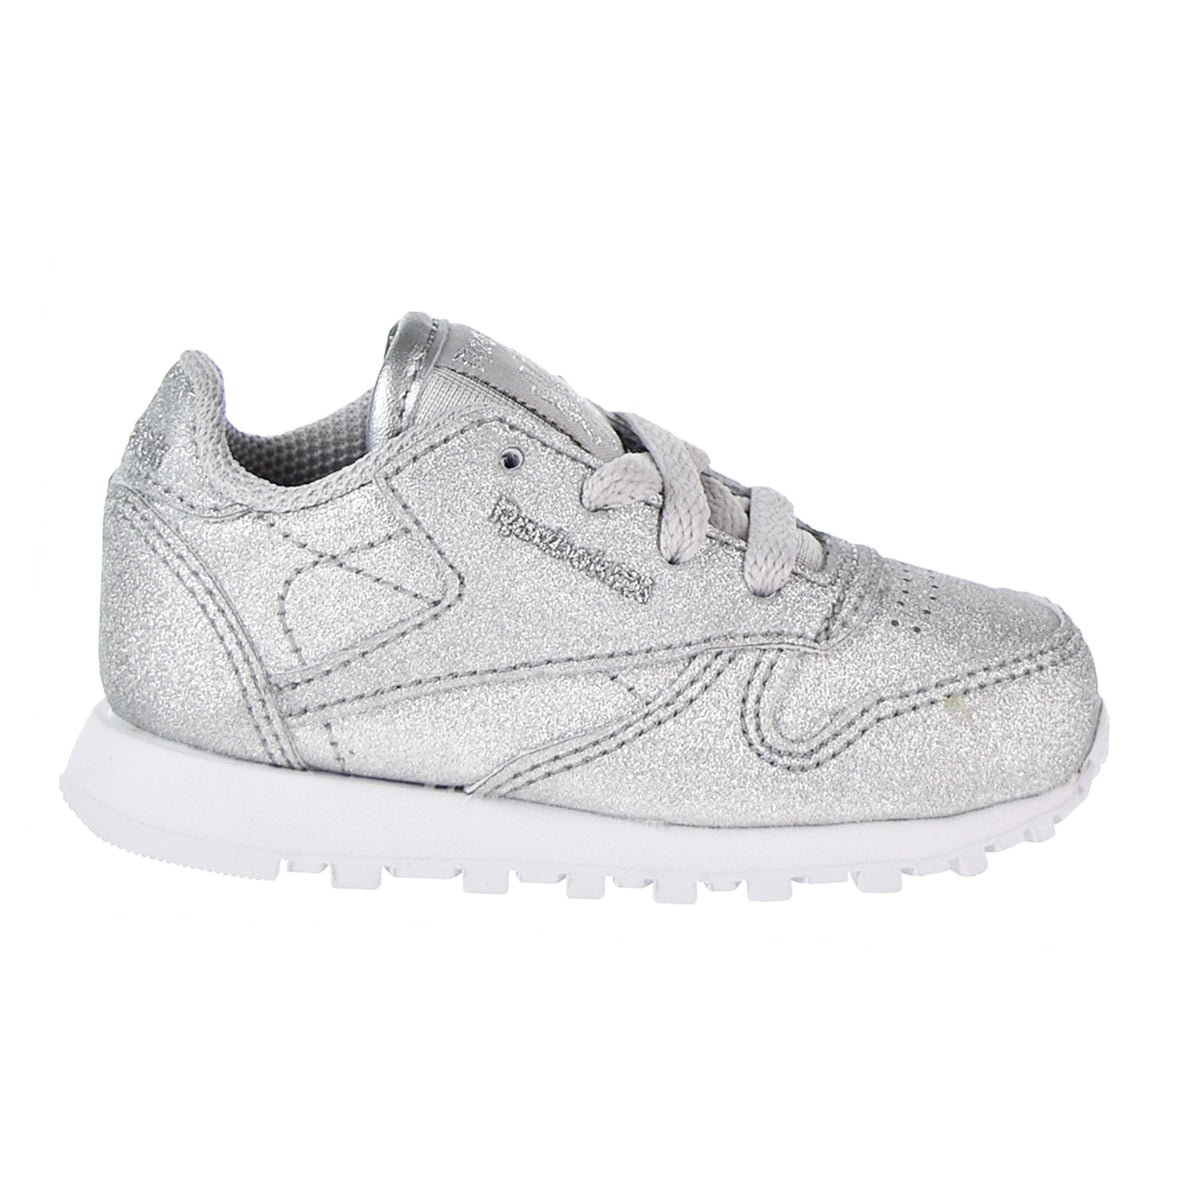 Reebok Classic Leather Toddler's Shoes Silver Metallic/Snow